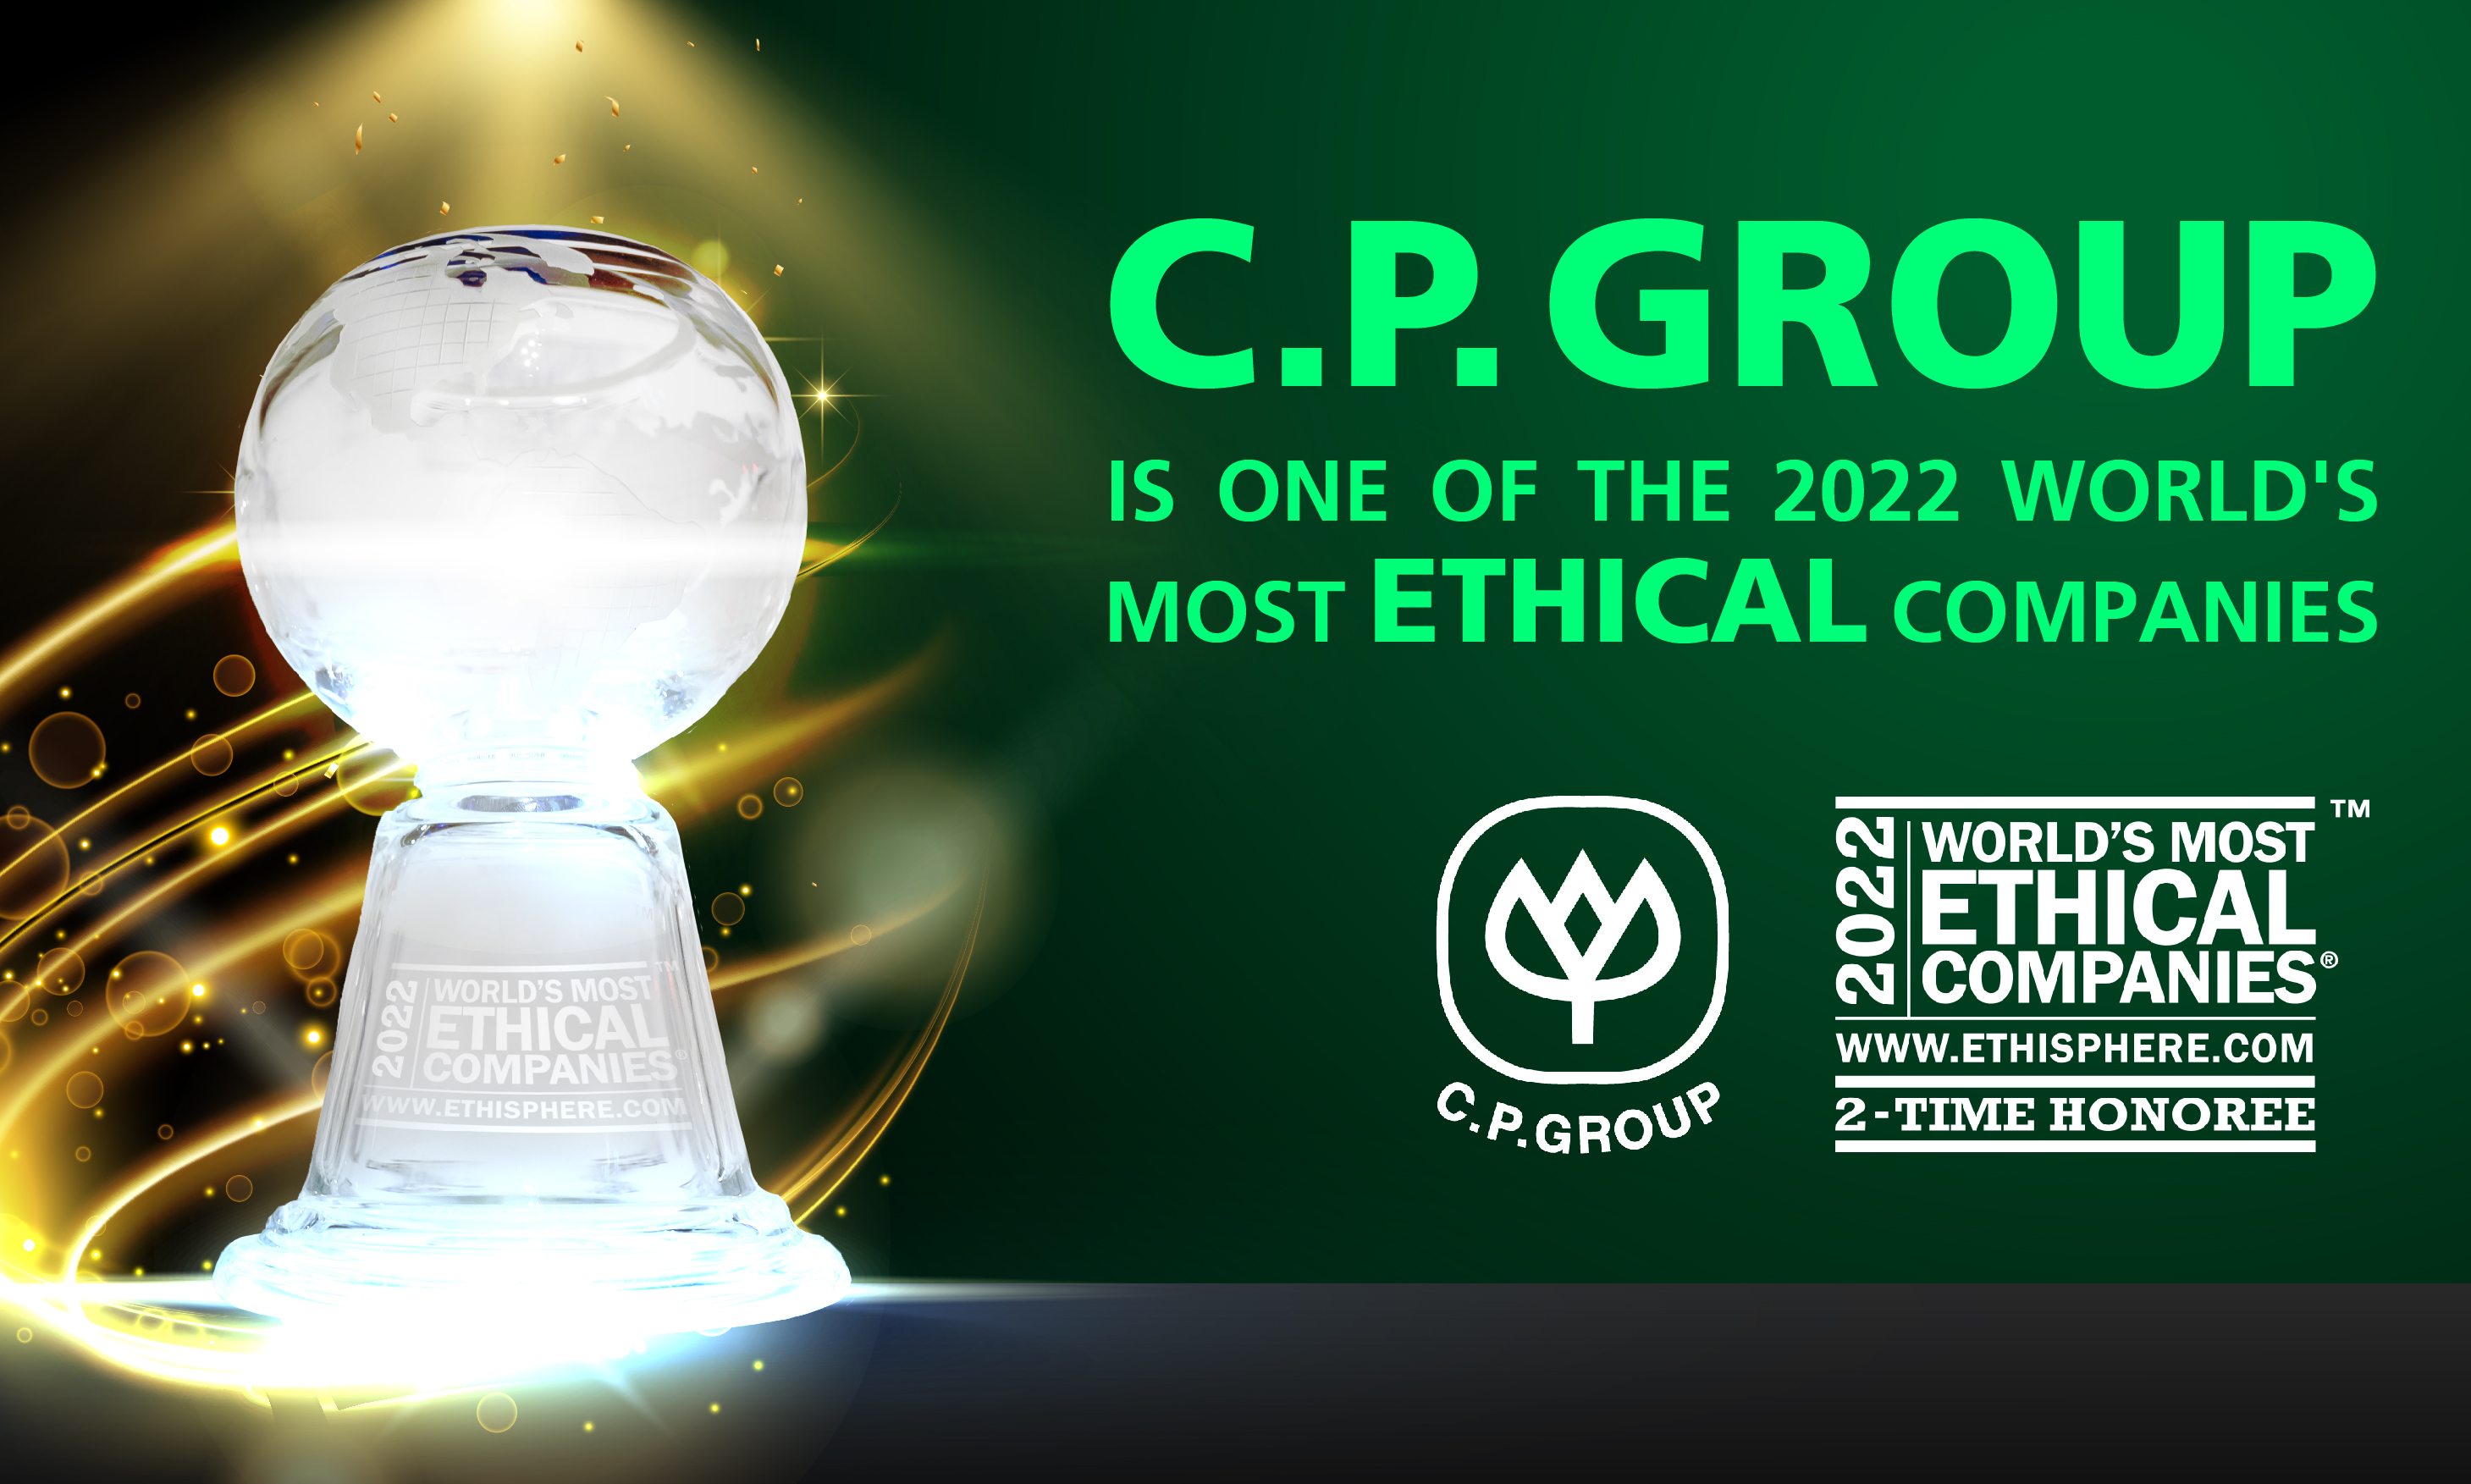 ETHISPHERE announces “CHAROEN POKPHAND GROUP” as one of The World’s Most Ethical Companies for the second consecutive year.